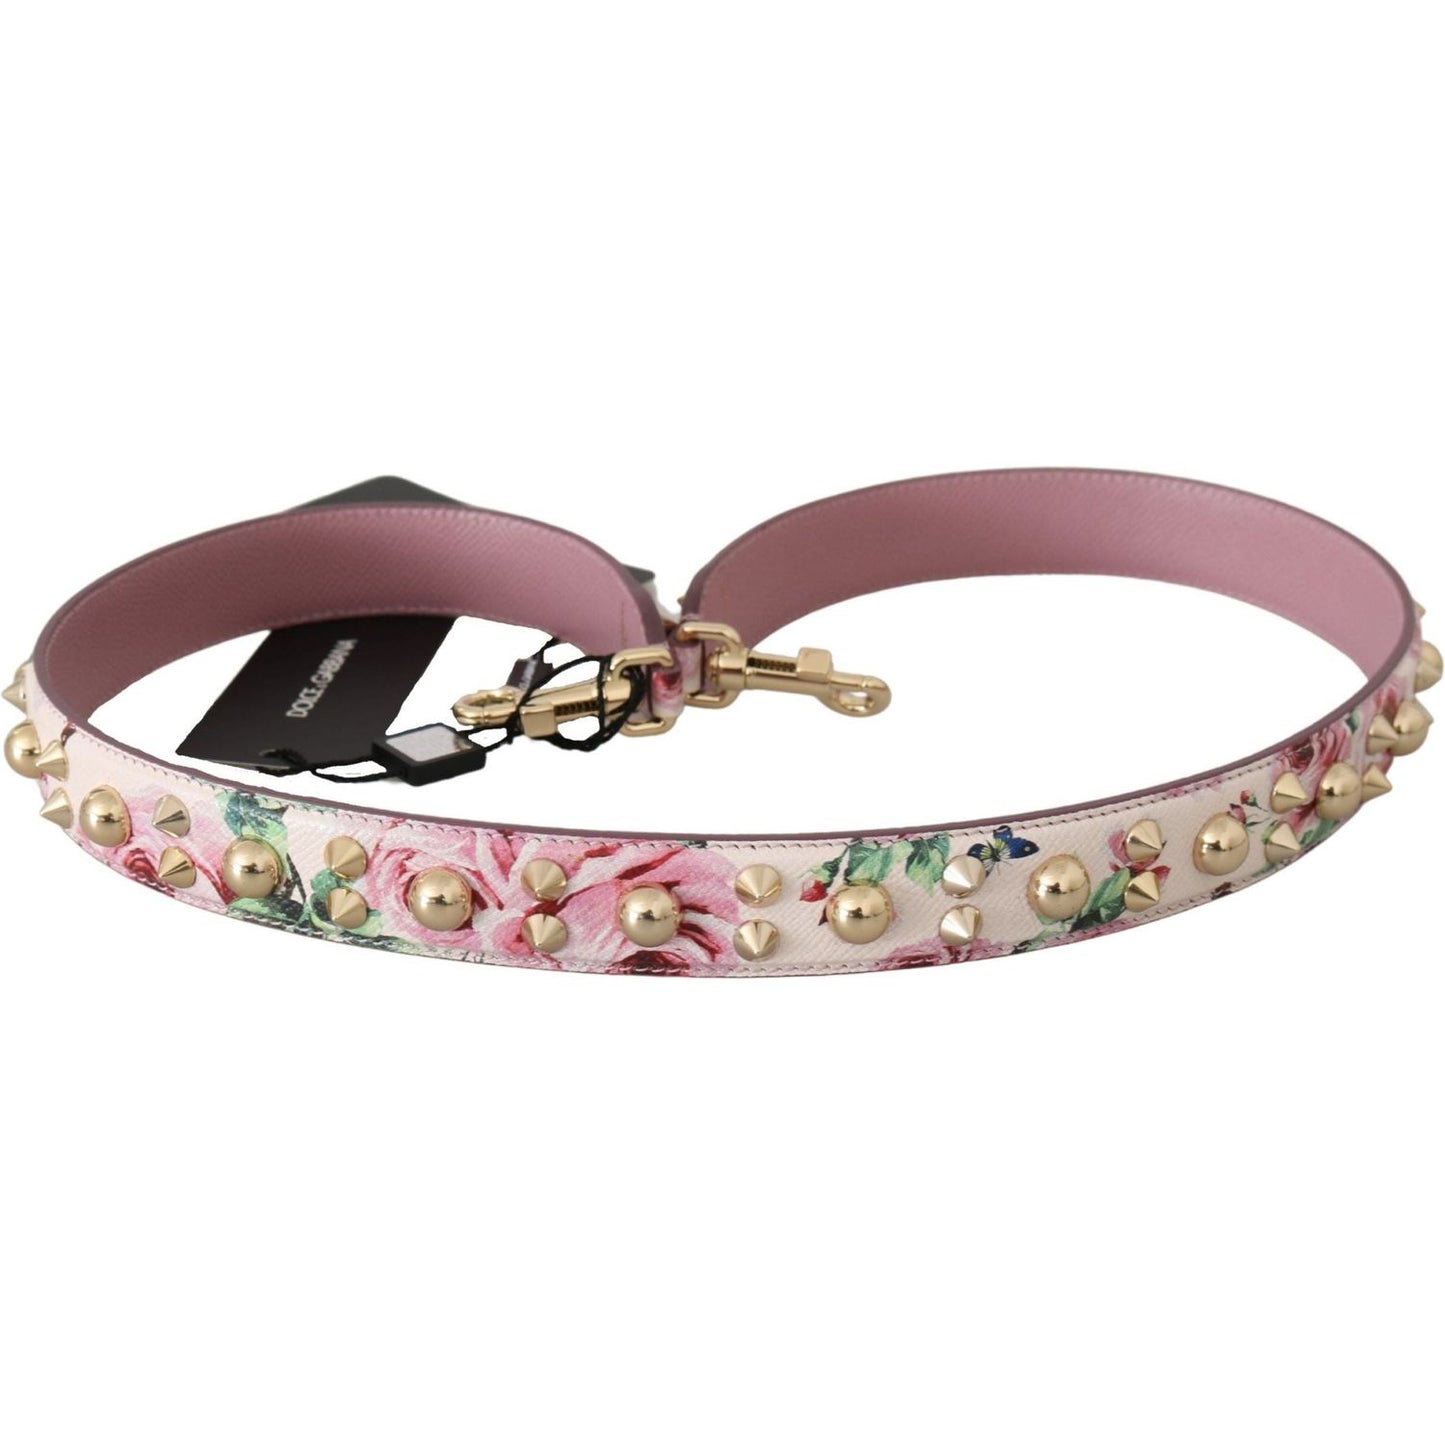 Dolce & Gabbana Chic Floral Pink Leather Shoulder Strap pink-floral-leather-stud-accessory-shoulder-strap-1